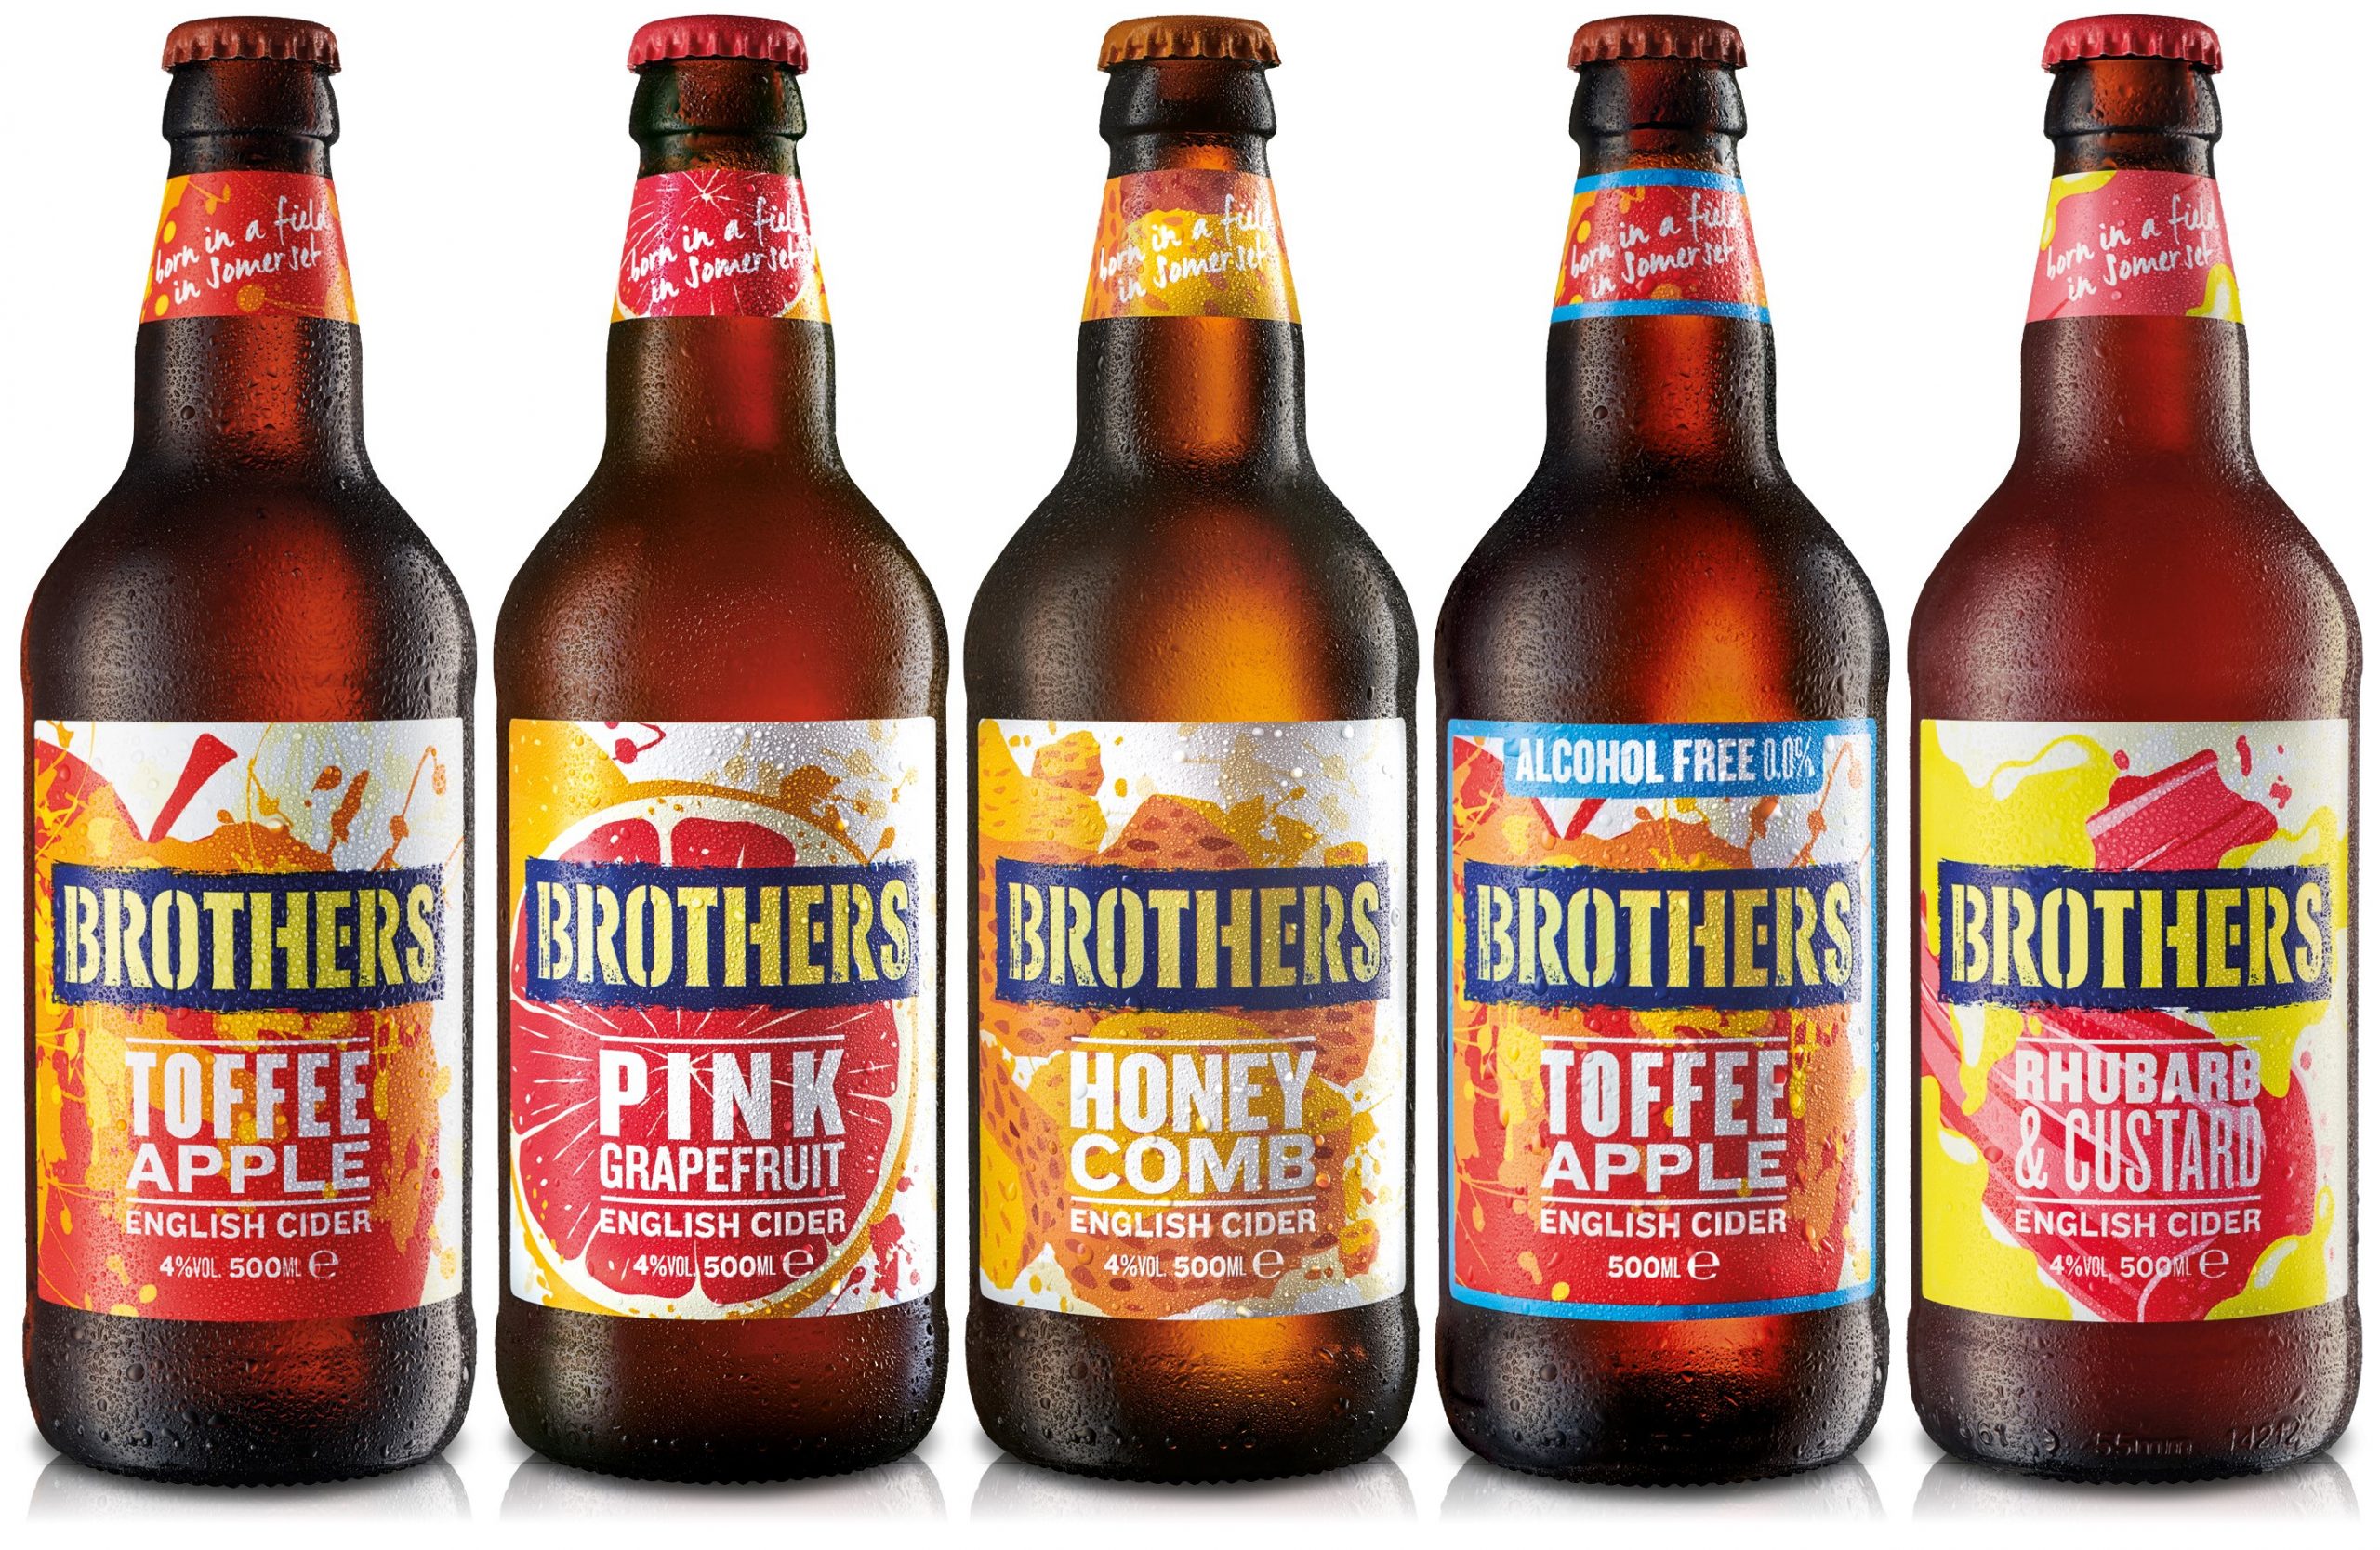 Brothers Drinks Co. experiences exceptional growth